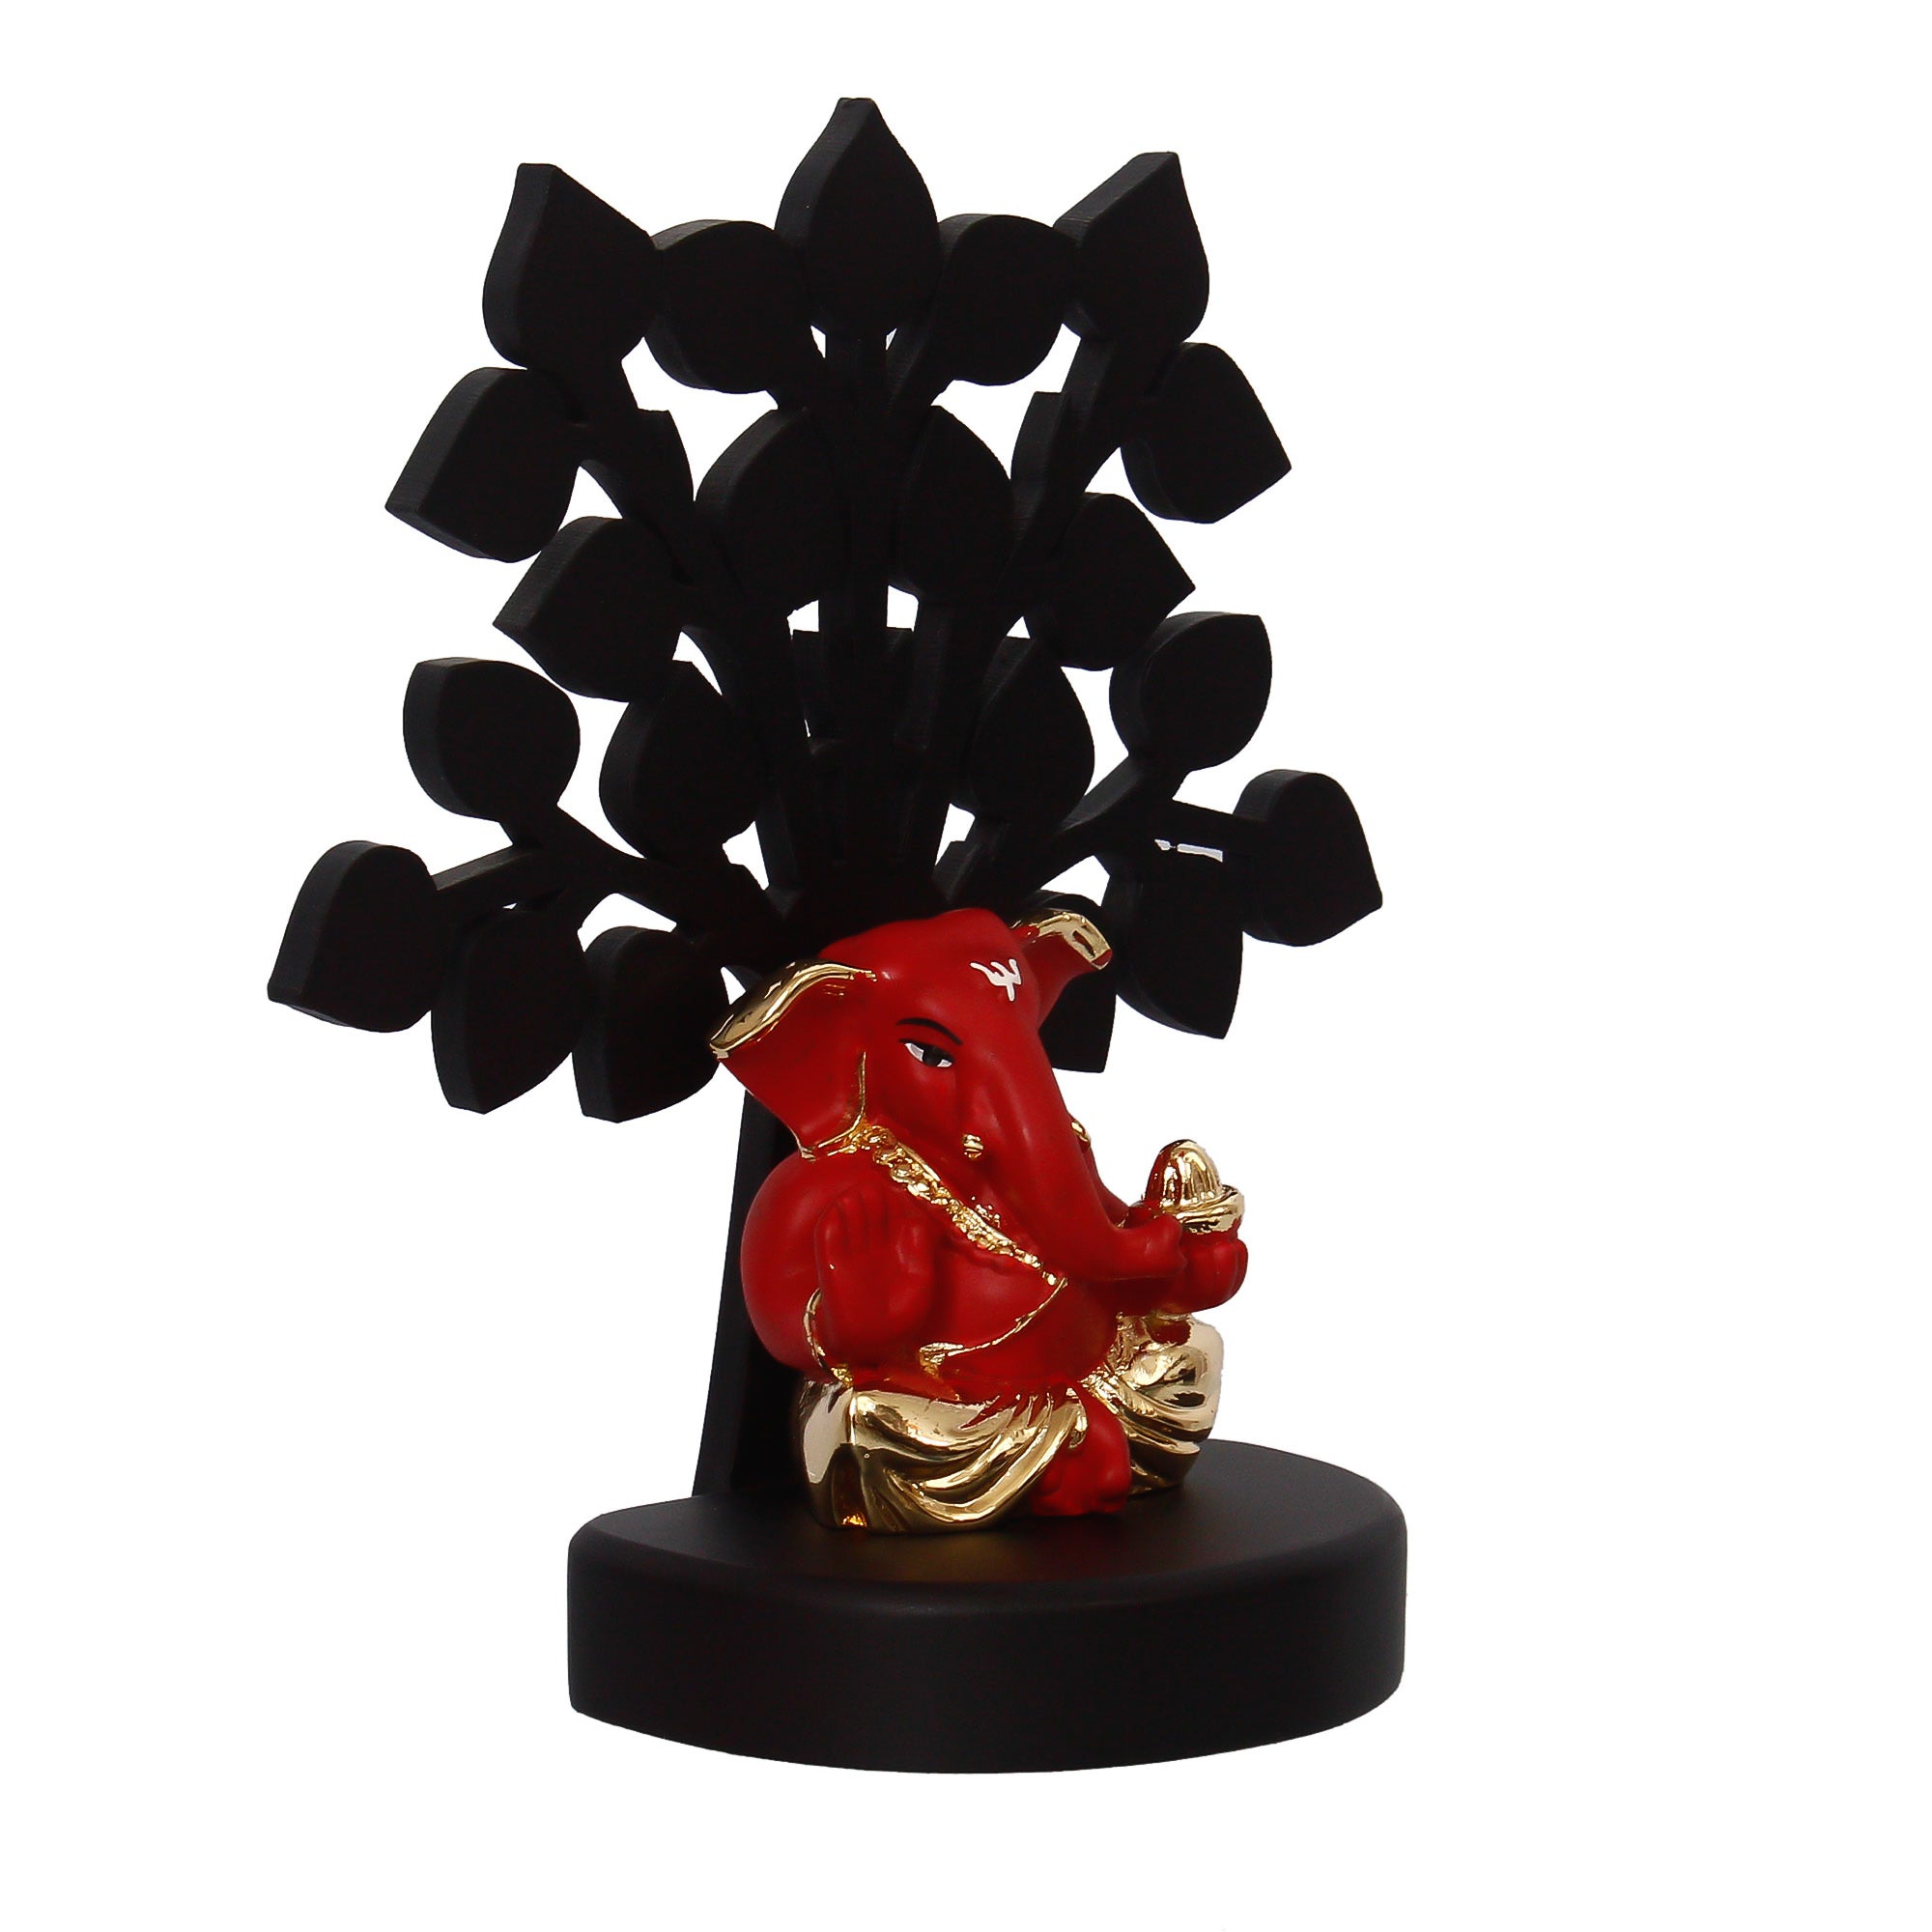 eCraftIndia Gold Plated Red Ganesha Decorative Showpiece with Wooden Tree for Home/Temple/Office/Car Dashboard 5